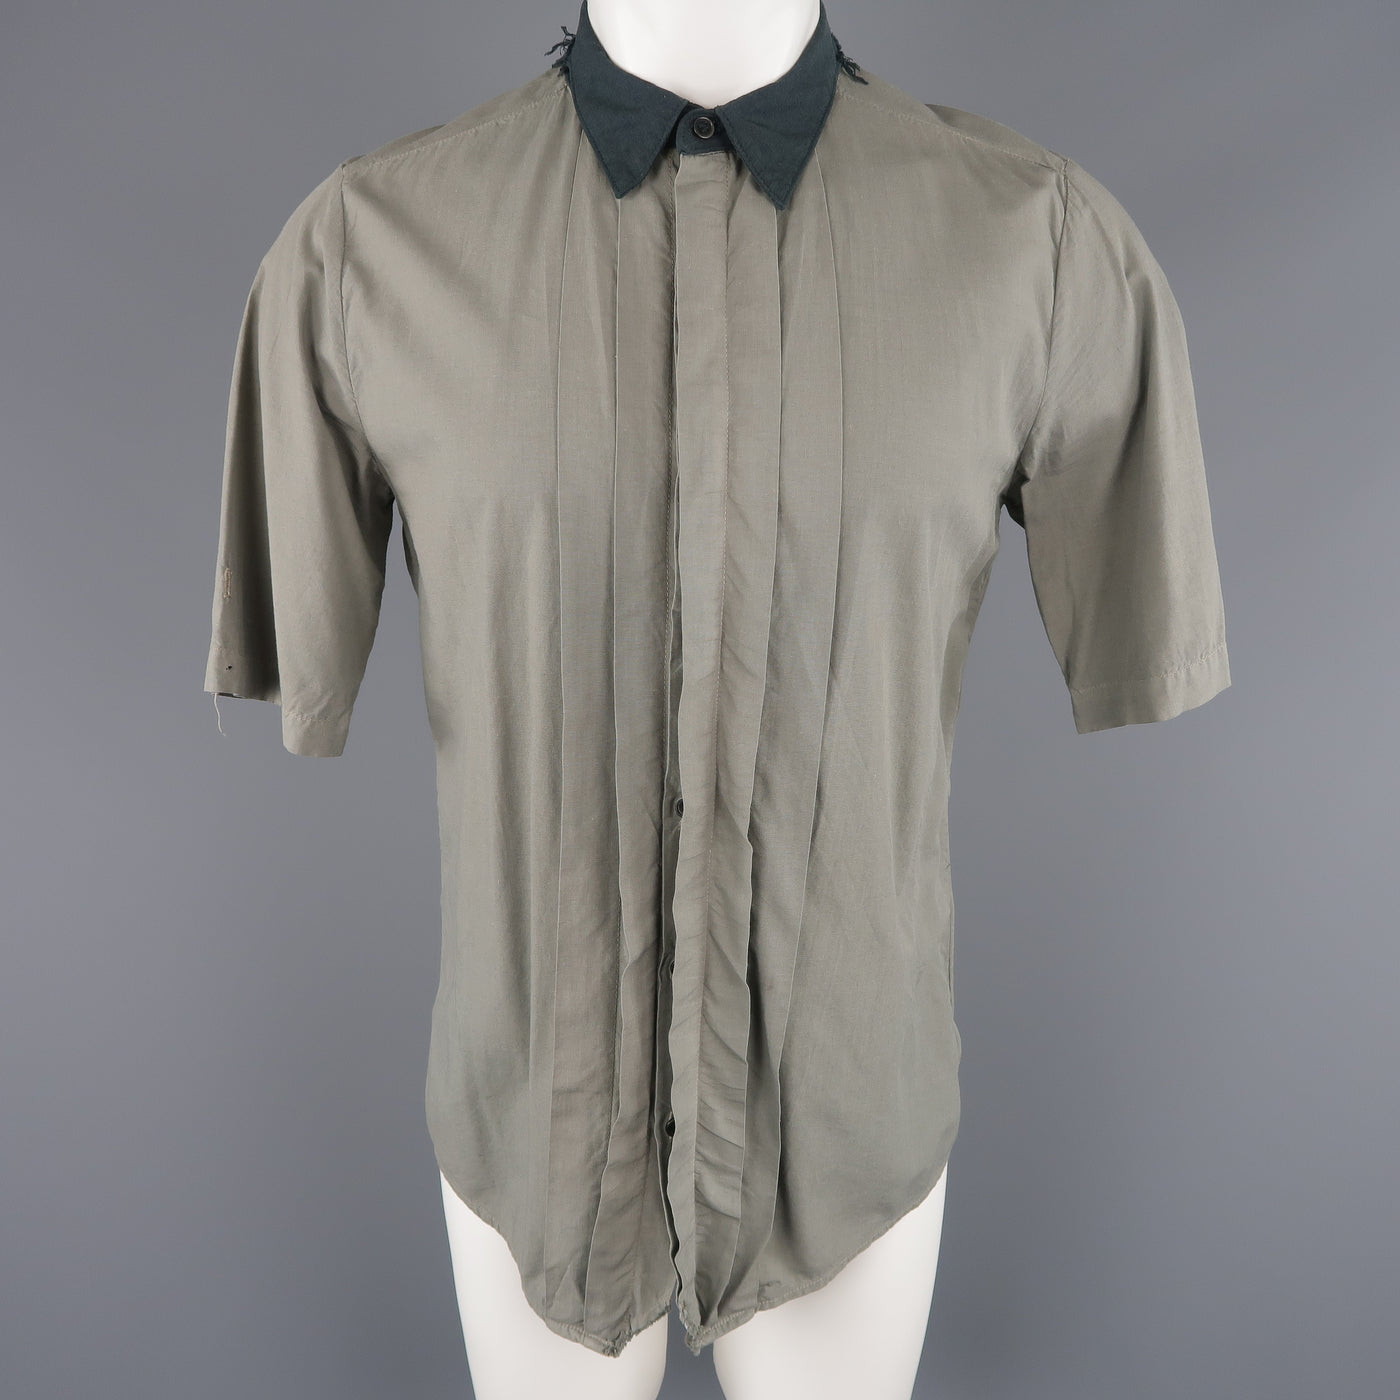 NICE COLLECTIVE Size M Grey Cotton Pleated Contrast Collar Short Sleeve Shirt